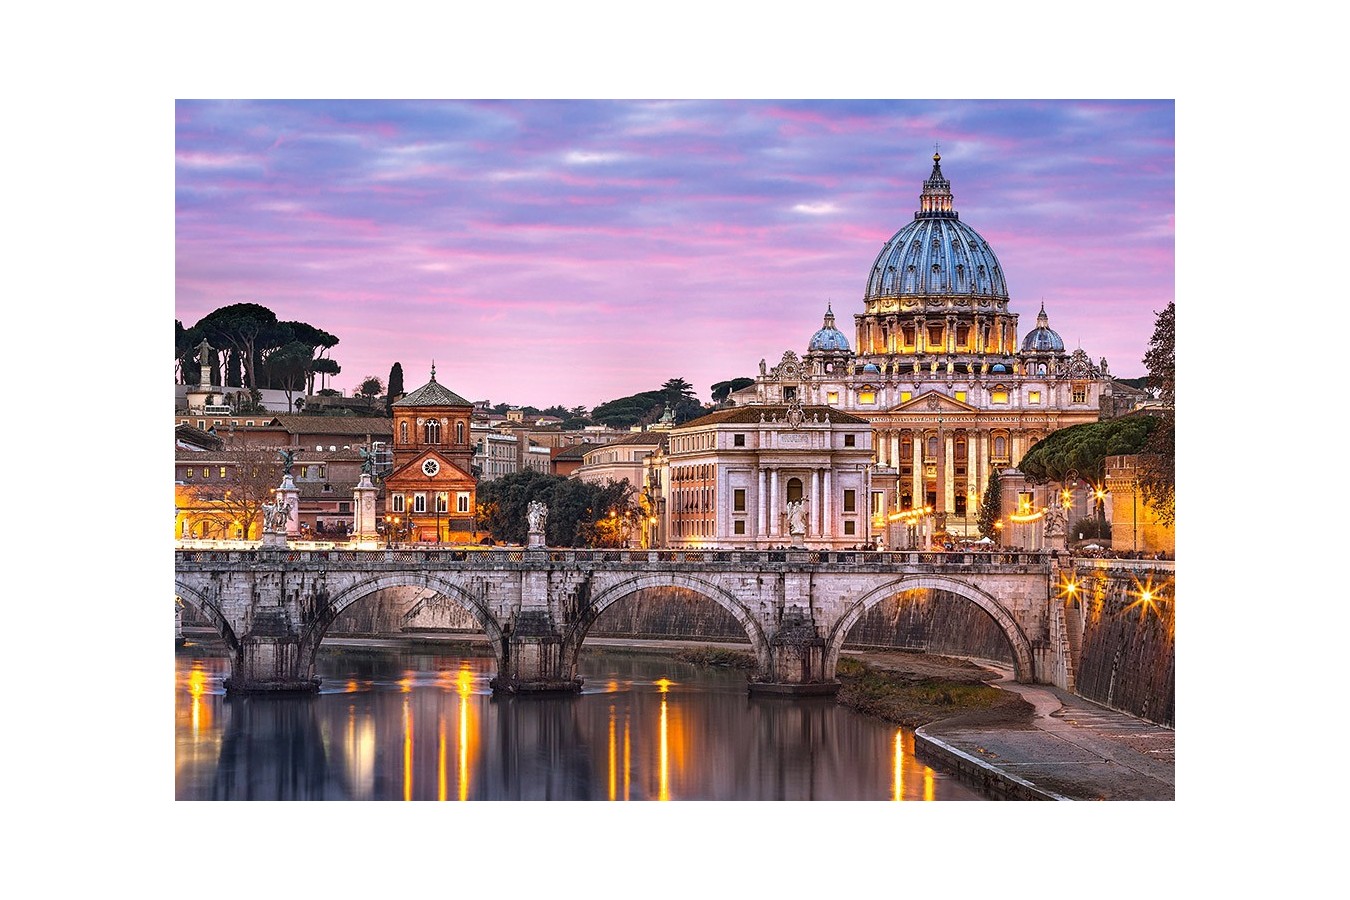 Puzzle Castorland - View of the Vatican, 500 piese